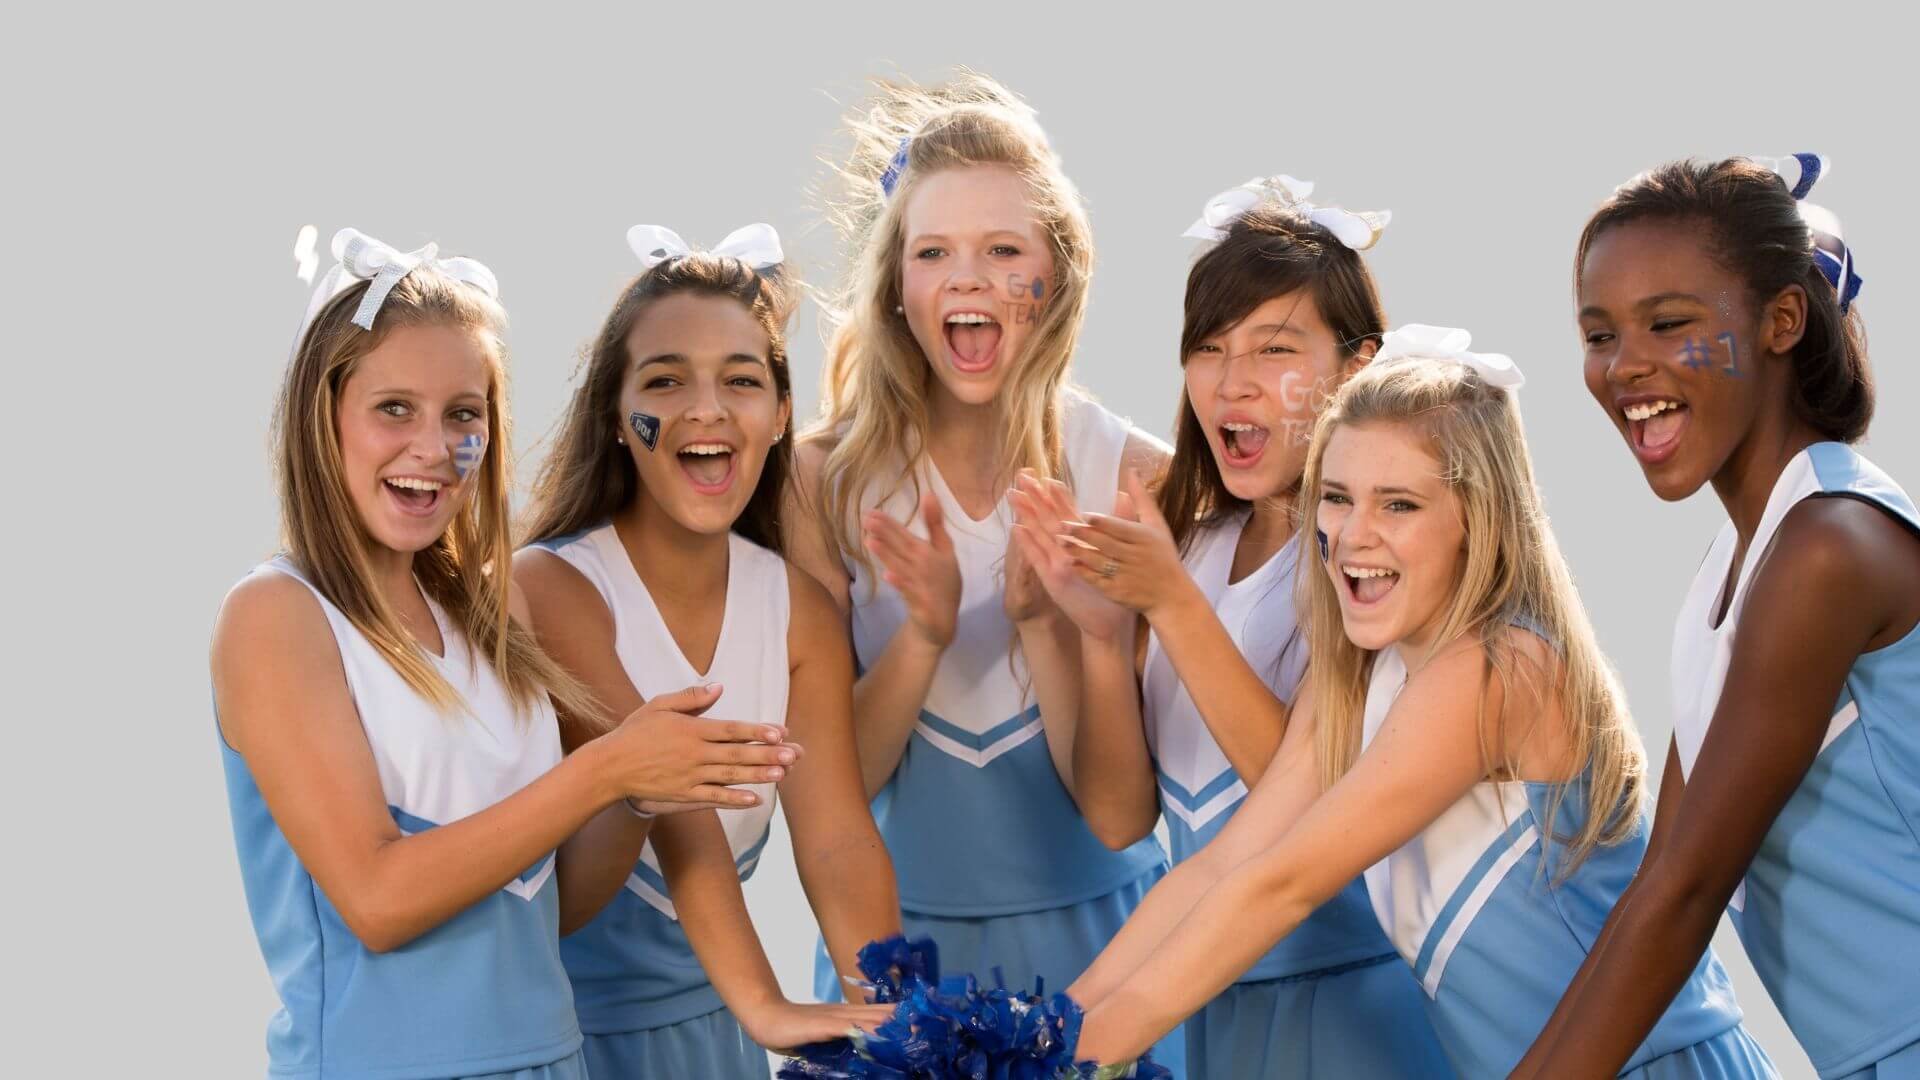 218 Captivating Cheer Team Names For Your Squad